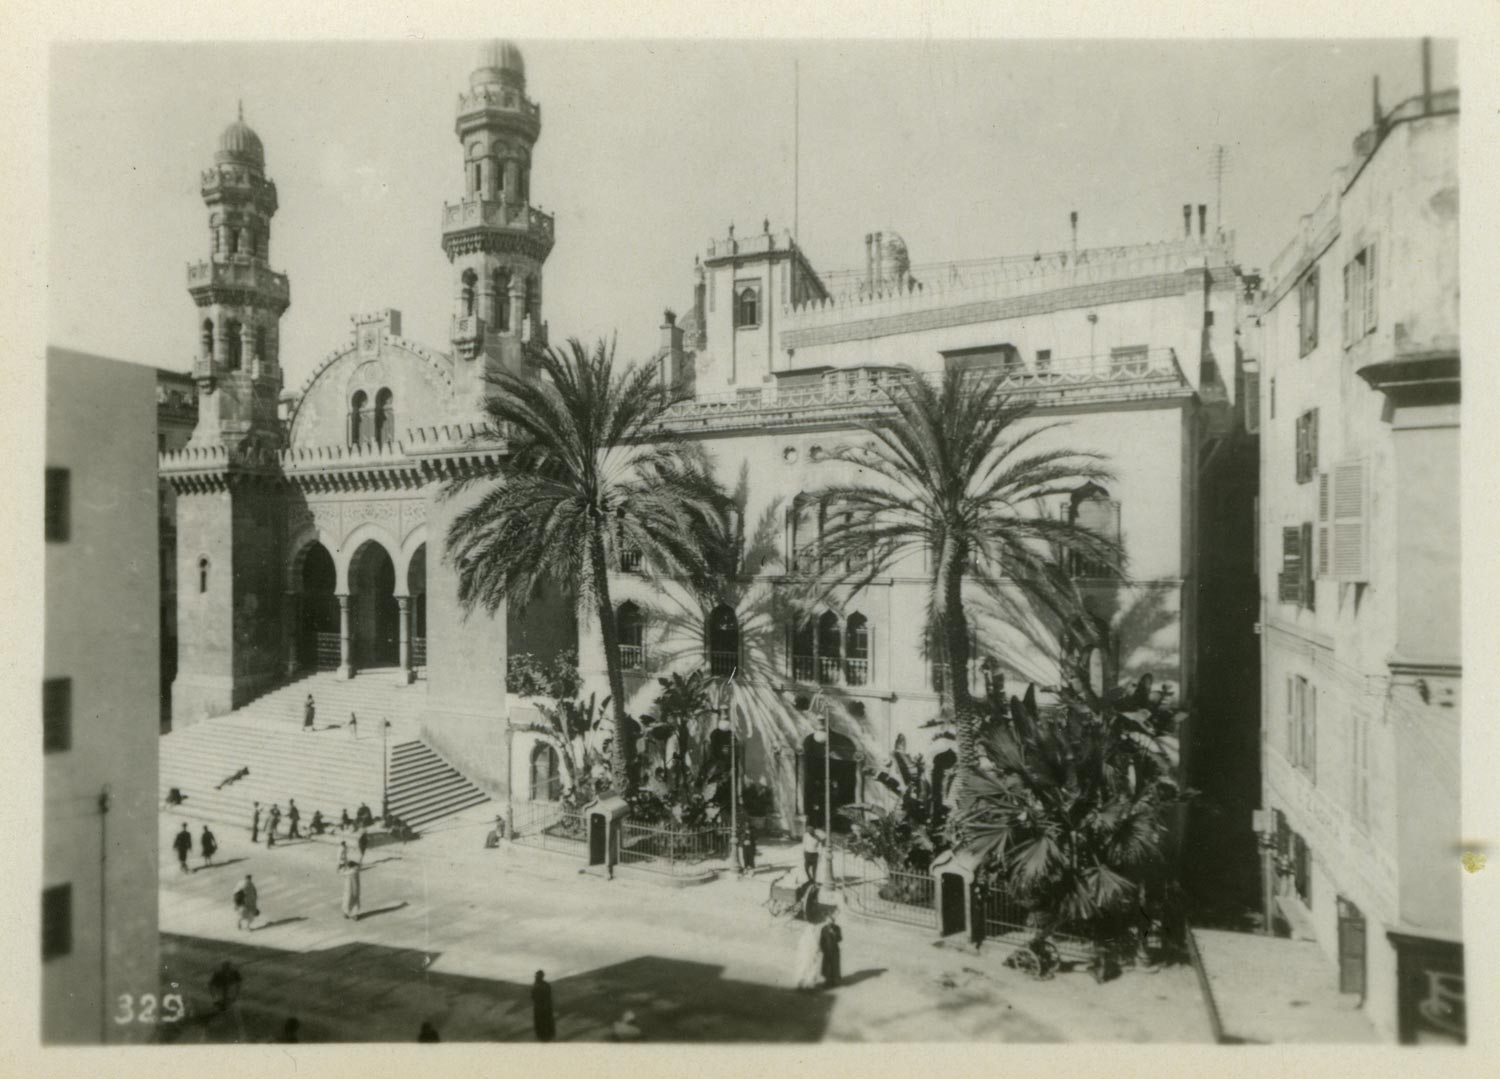 Jami' Ketchaoua - View of the governor's palace and the mosque